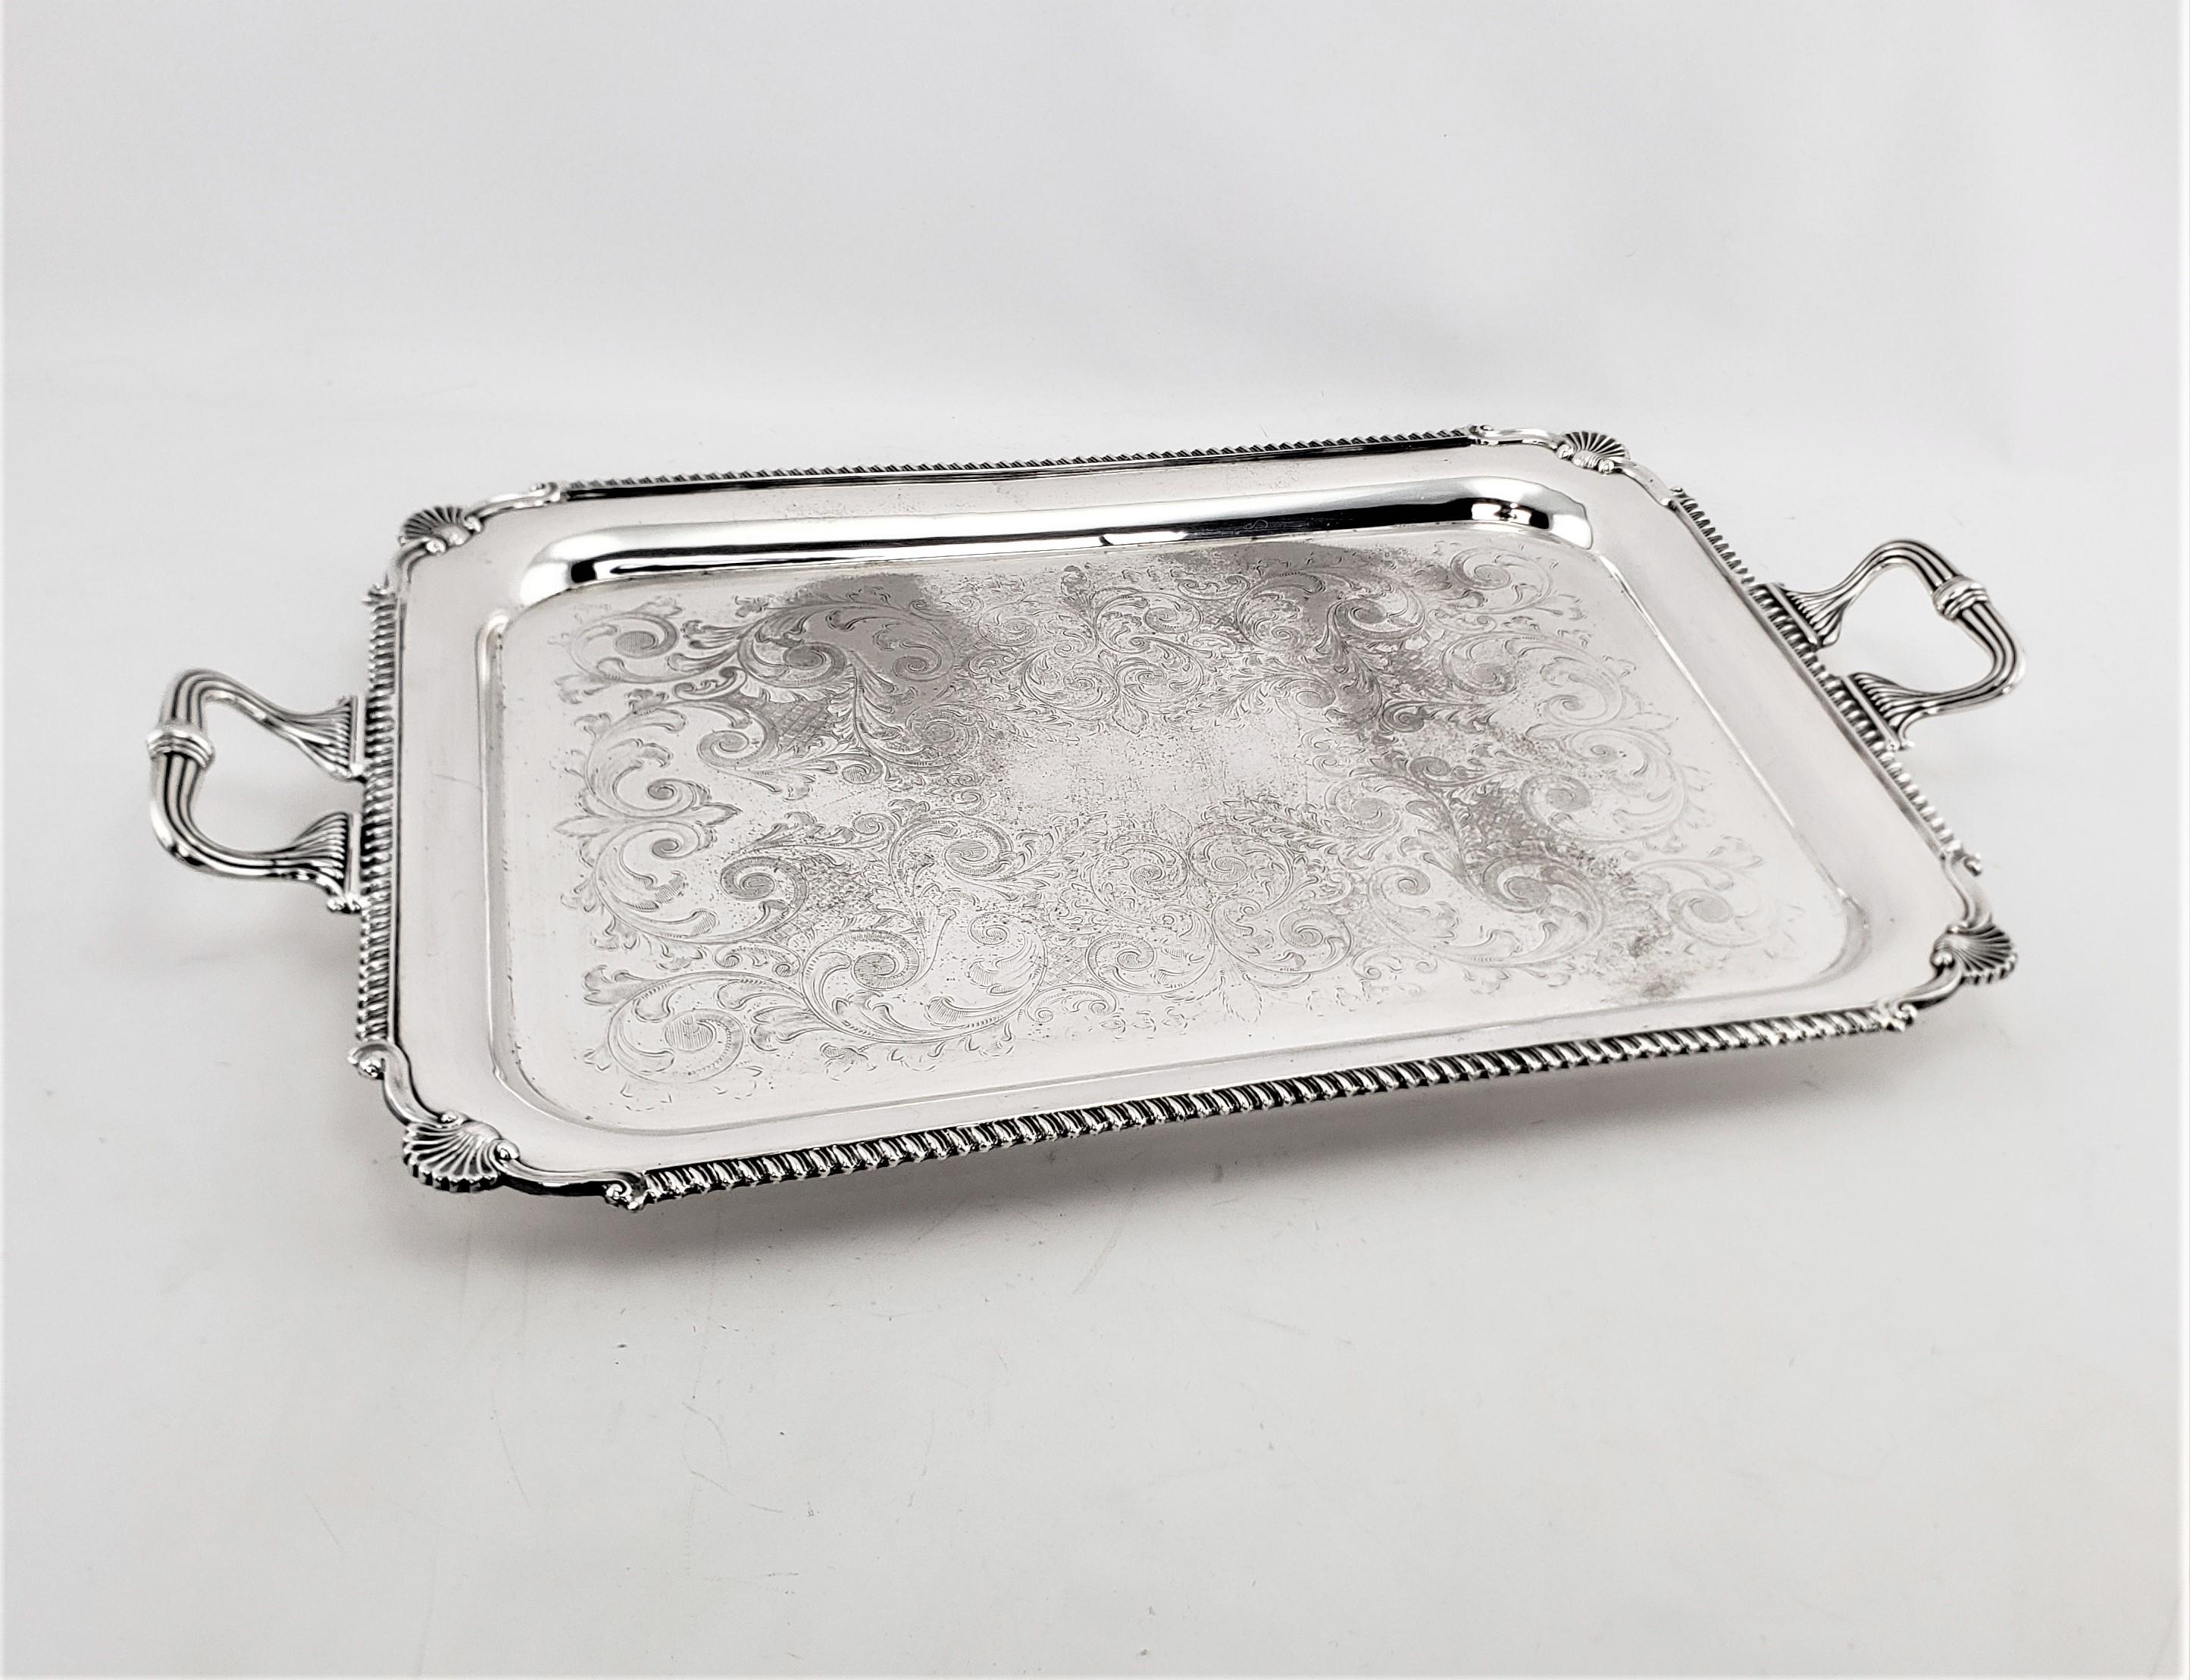 This large silver plated serving tray shows no maker's mark, but did originate from England and date to approximately 1920 and done in an Edwardian style. The tray has nice stylized fans on each of the corners and ribbed ribbon styled handles. The